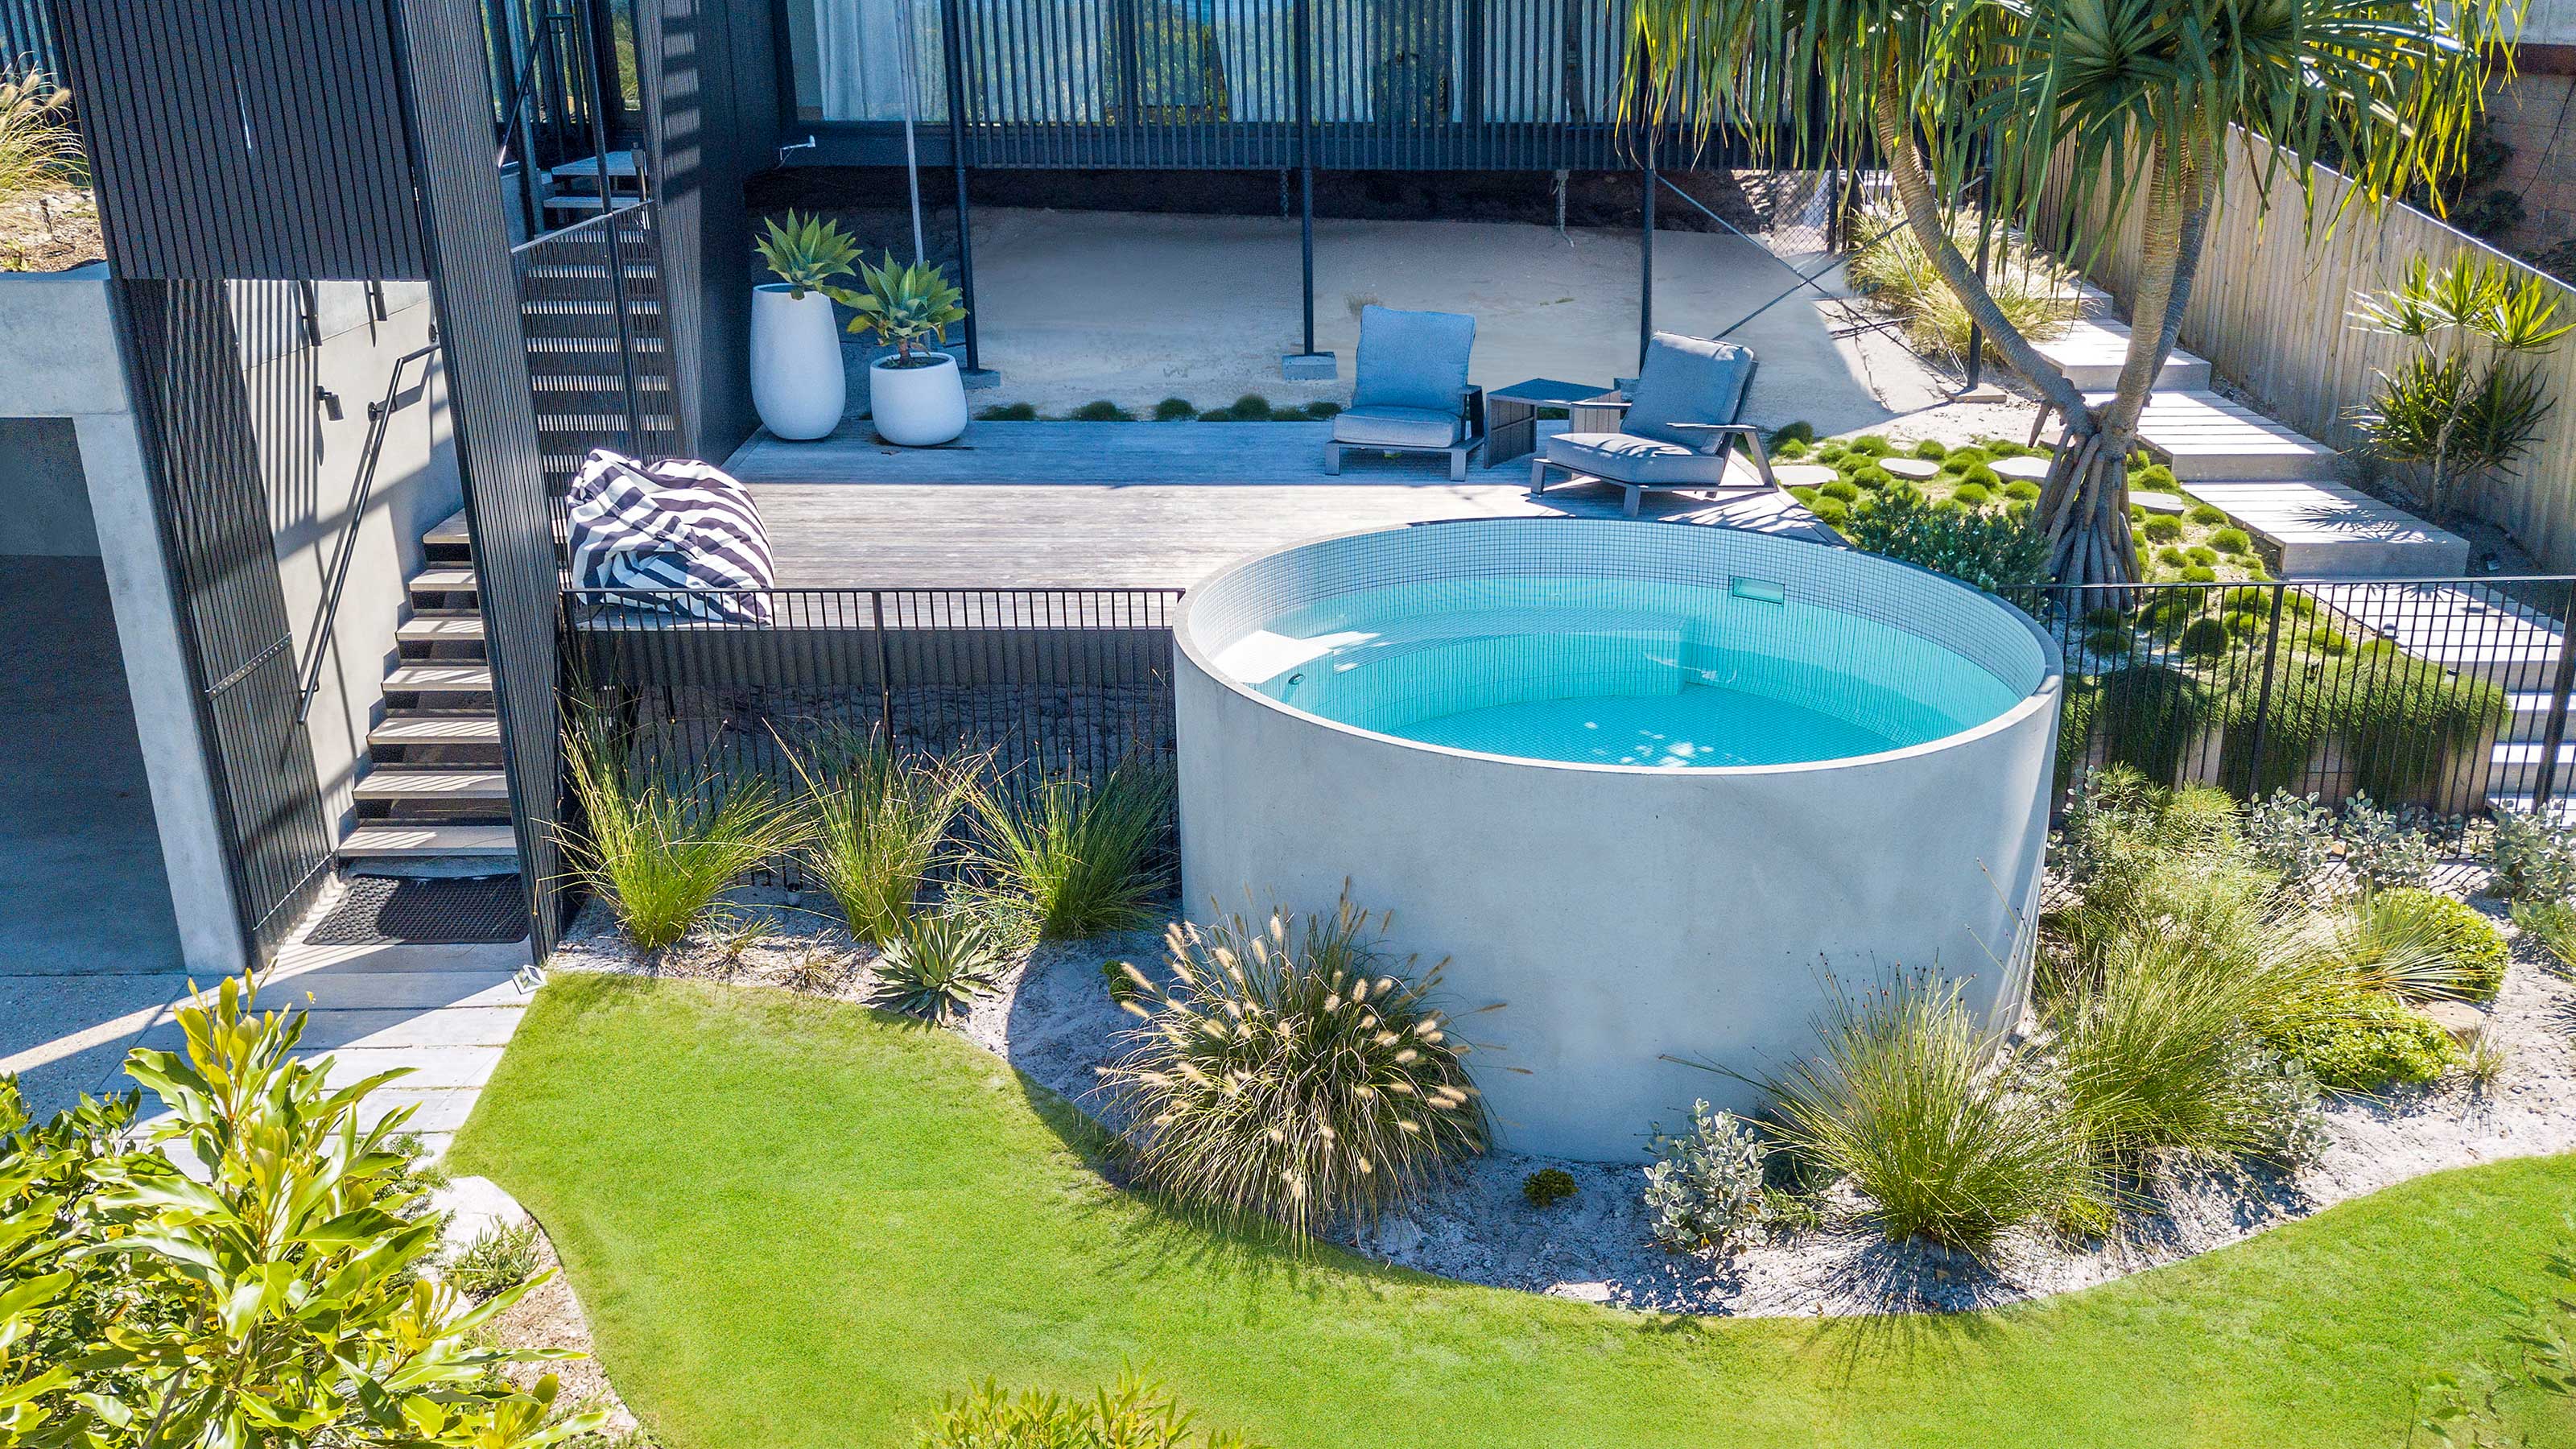 Above Ground Pool Deck Ideas: 10 Setups To Get Inspired By | Gardeningetc